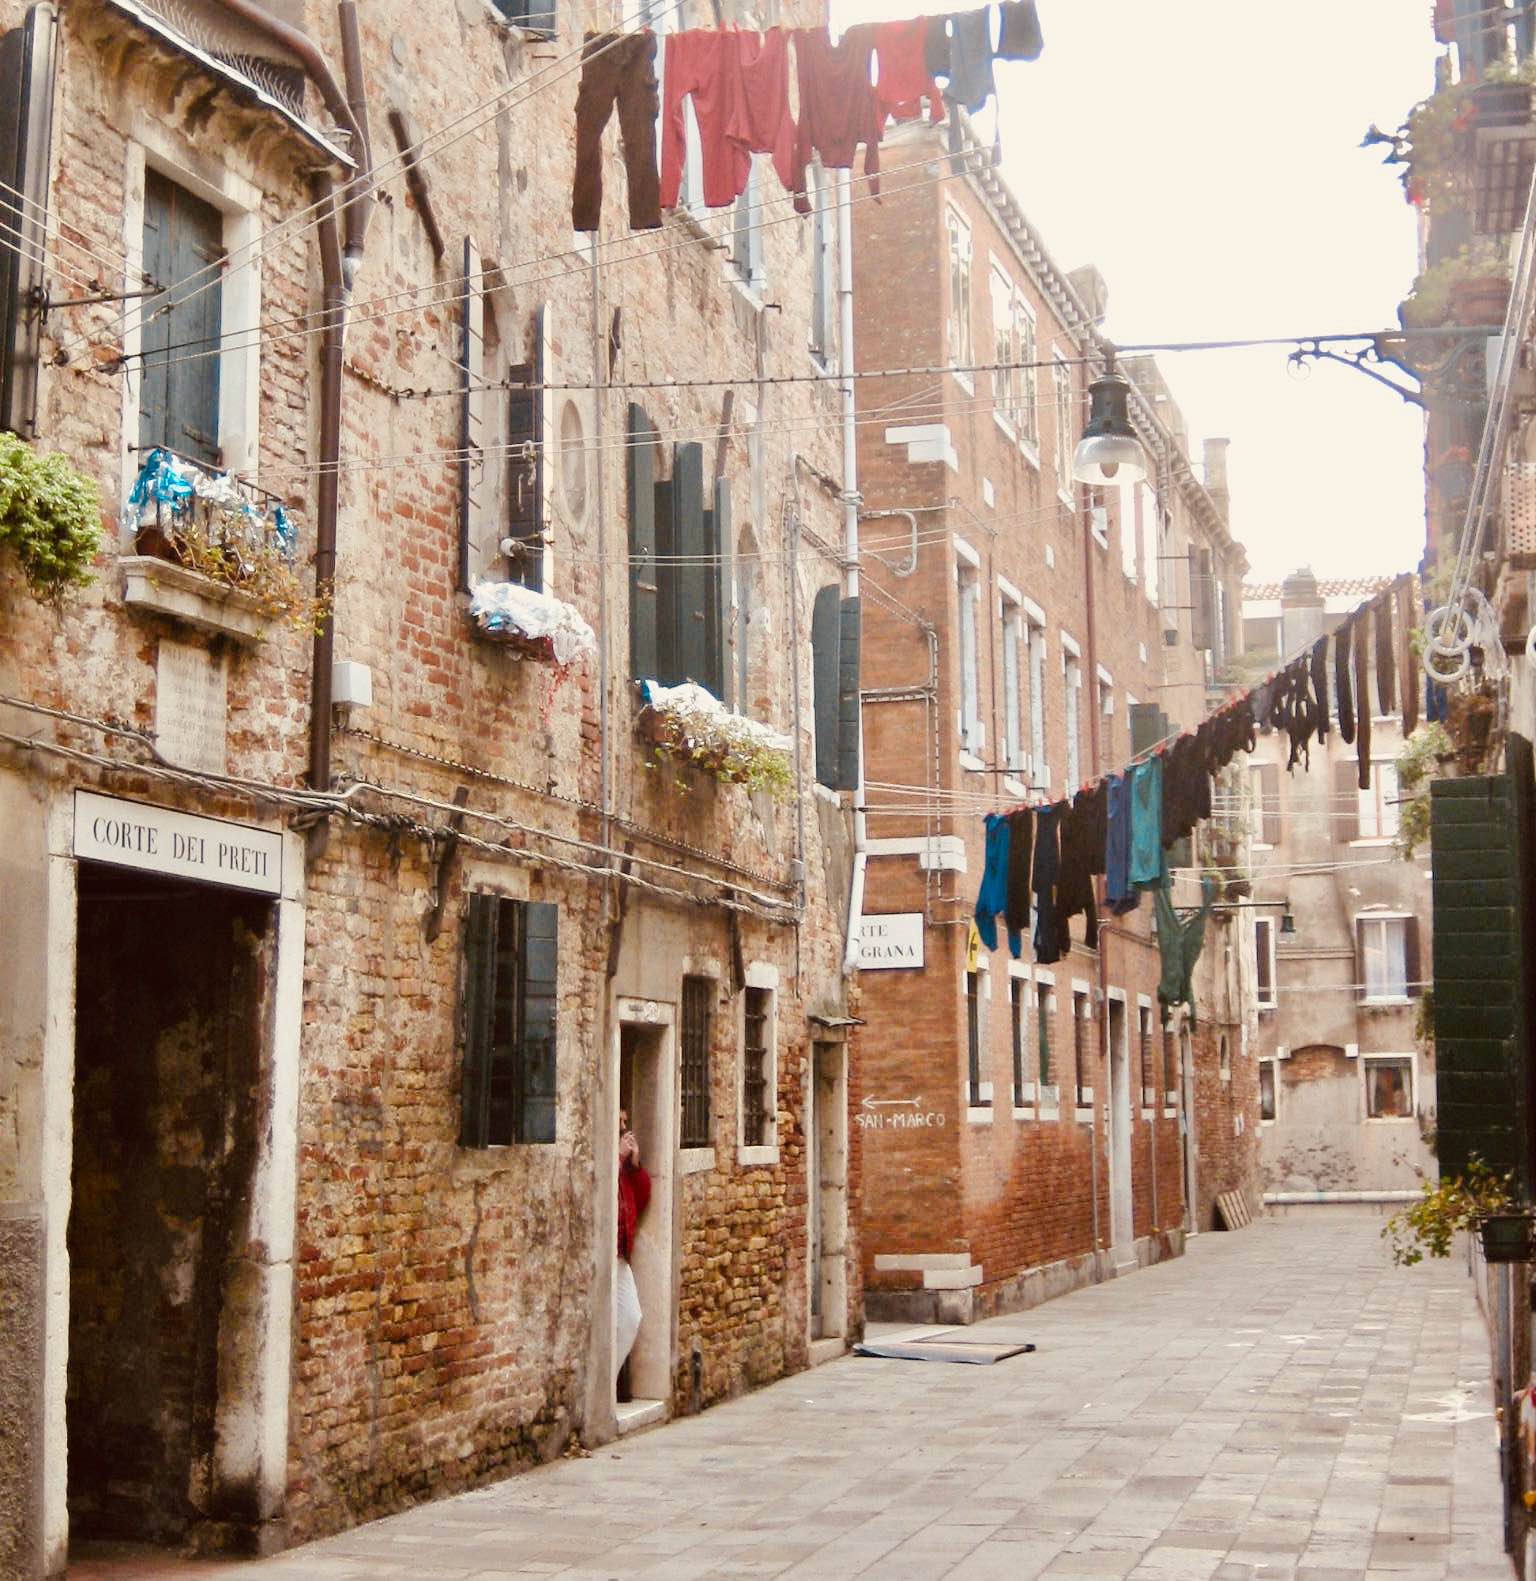 Laundry hanging in a Venice street.